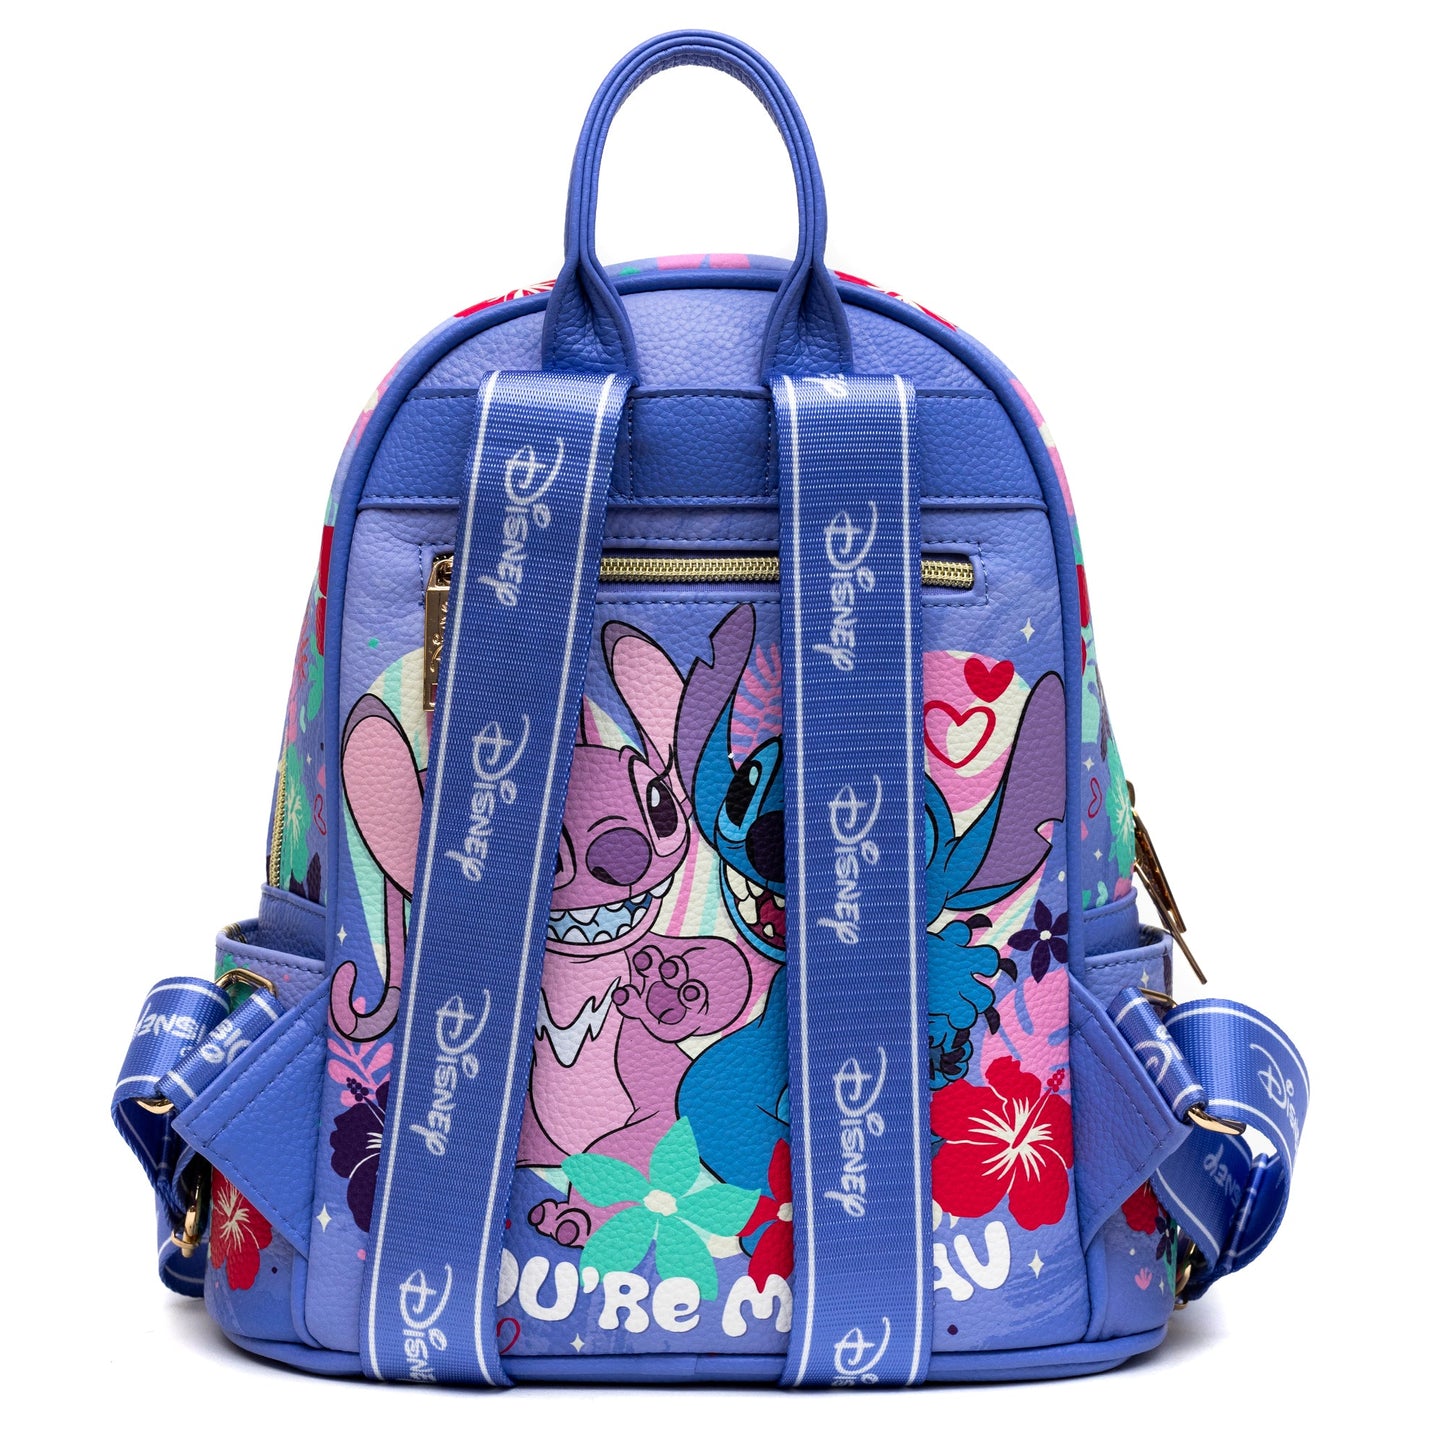 Exclusive Limited Edition- Purple Stitch Vegan Leather Backpack